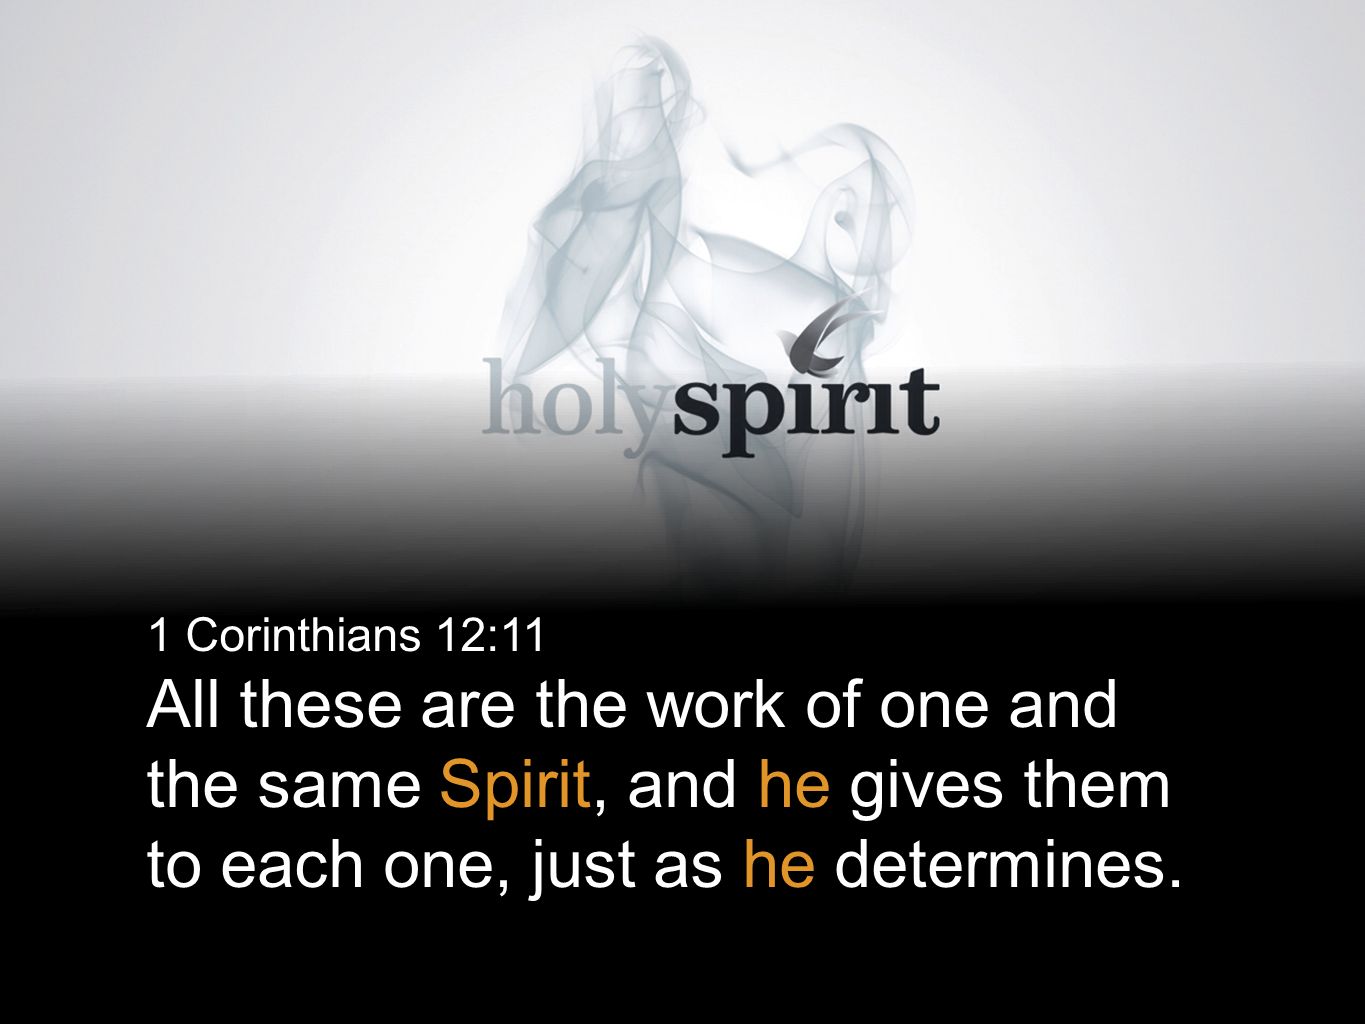 1 Corinthians 12:11 All these are the work of one and the same Spirit, and he gives them to each one, just as he determines.